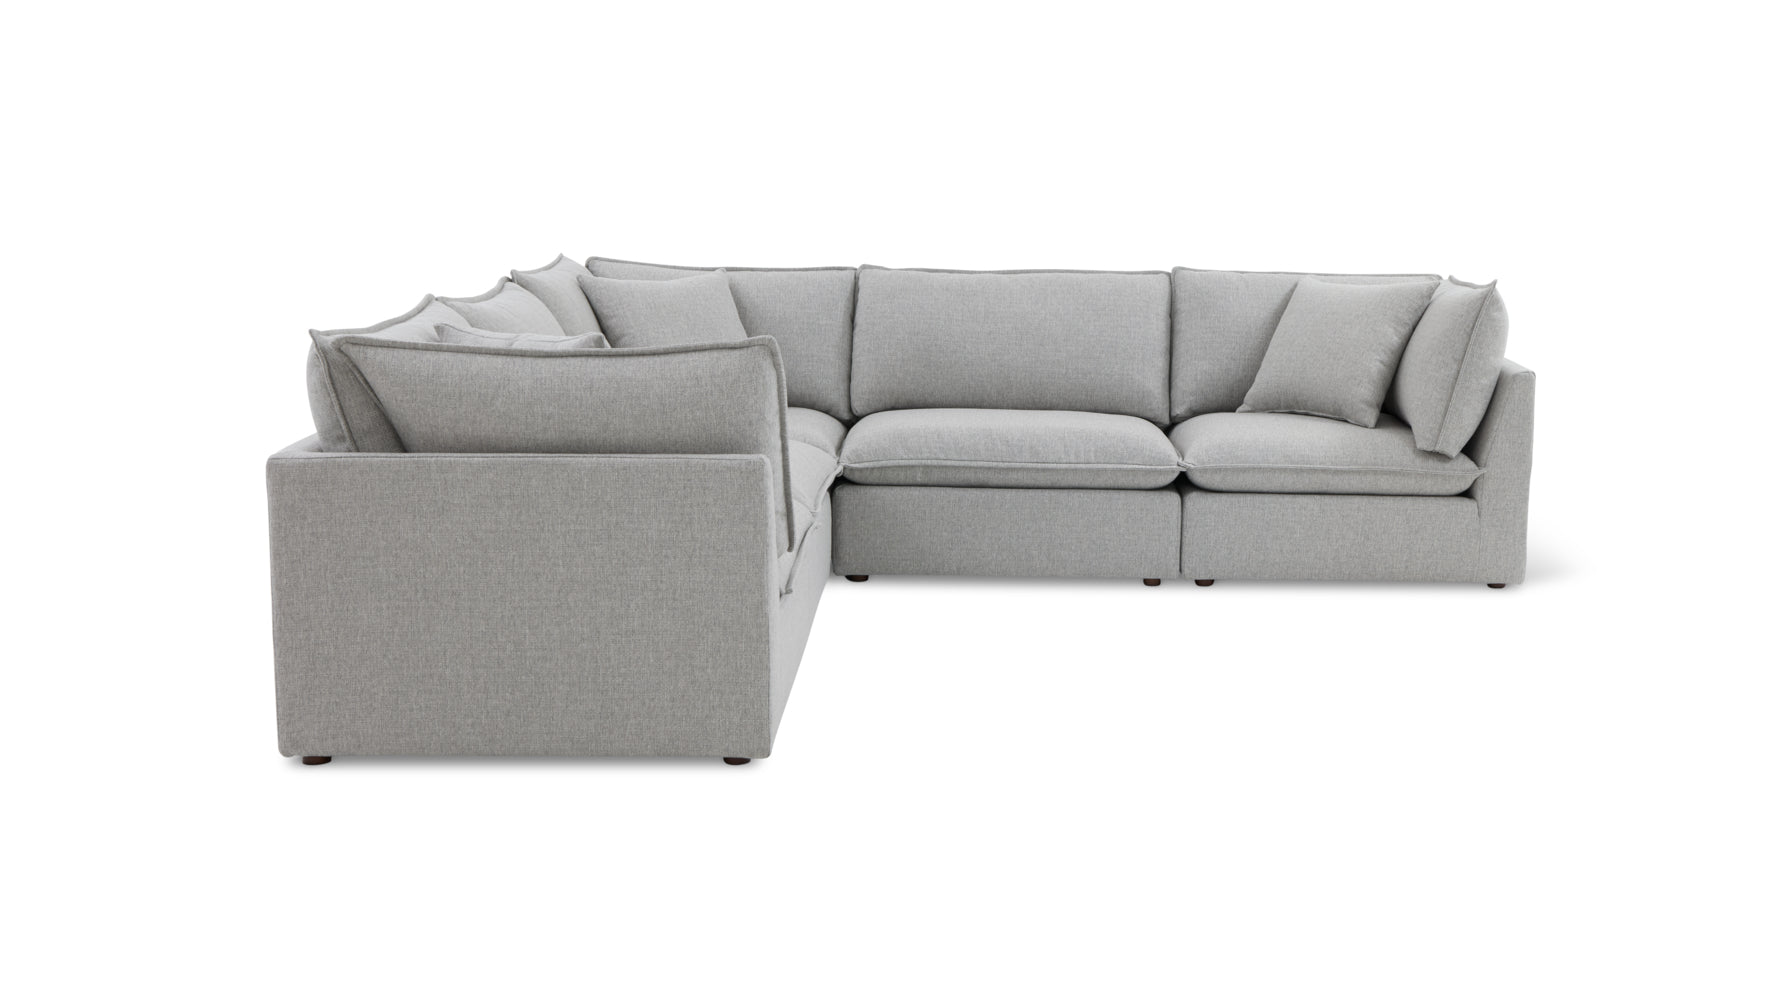 Chill Time 5-Piece Modular Sectional Closed, Heather - Image 3